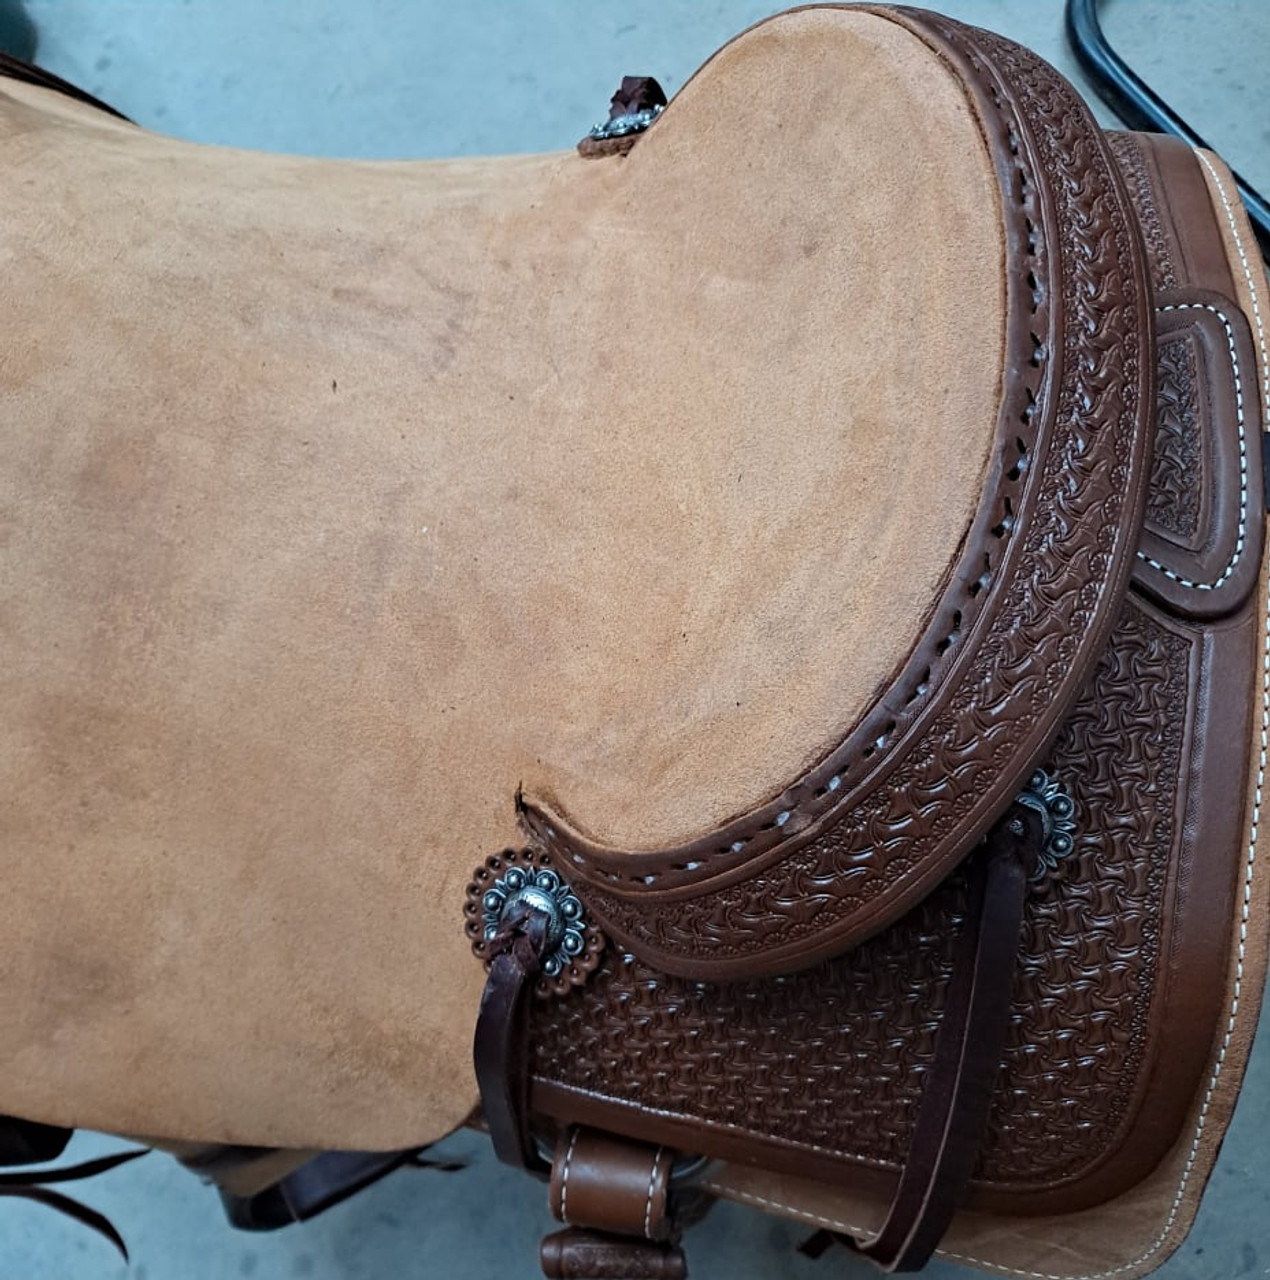 New Cutting Saddle by Fort Worth Saddle Co with 15 inch seat. Hermann Oak leather. Roughout contact points and skirt. Hand tooled rear chassis, cantle, and pommel. Gullet size is 7 inch, weight is 36lbs, and skirt is 27.5 inch. Made in USA. Limited lifetime warranty.

S1496